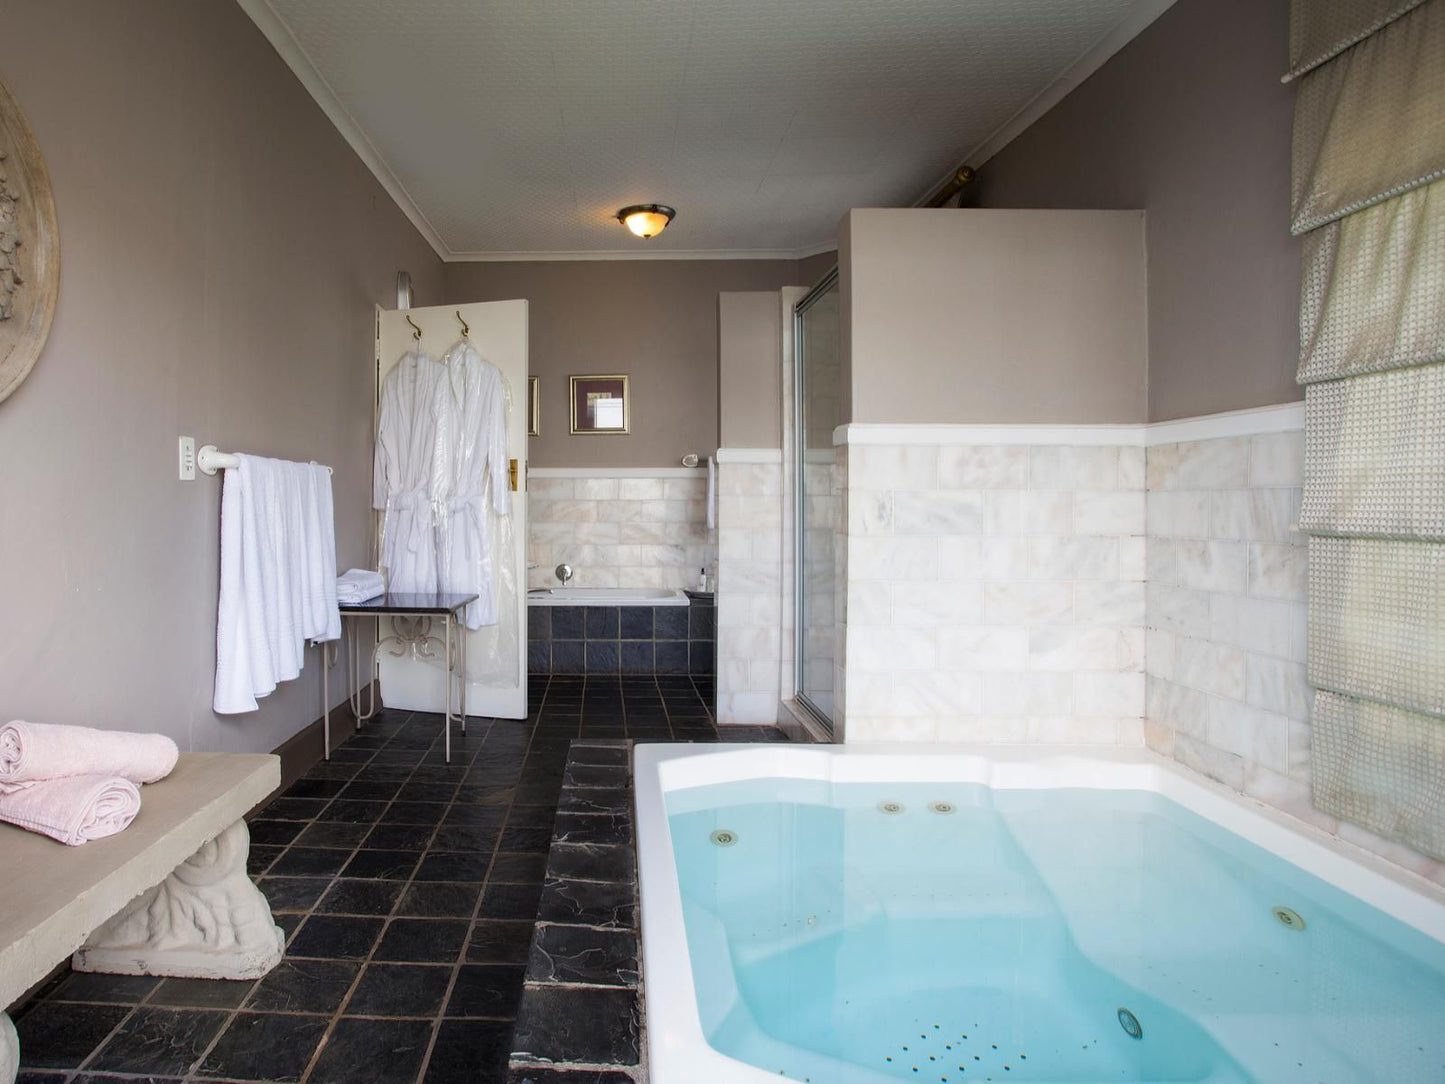 Leeuwenhof Country Lodge And Garden Spa Modimolle Nylstroom Limpopo Province South Africa Bathroom, Swimming Pool